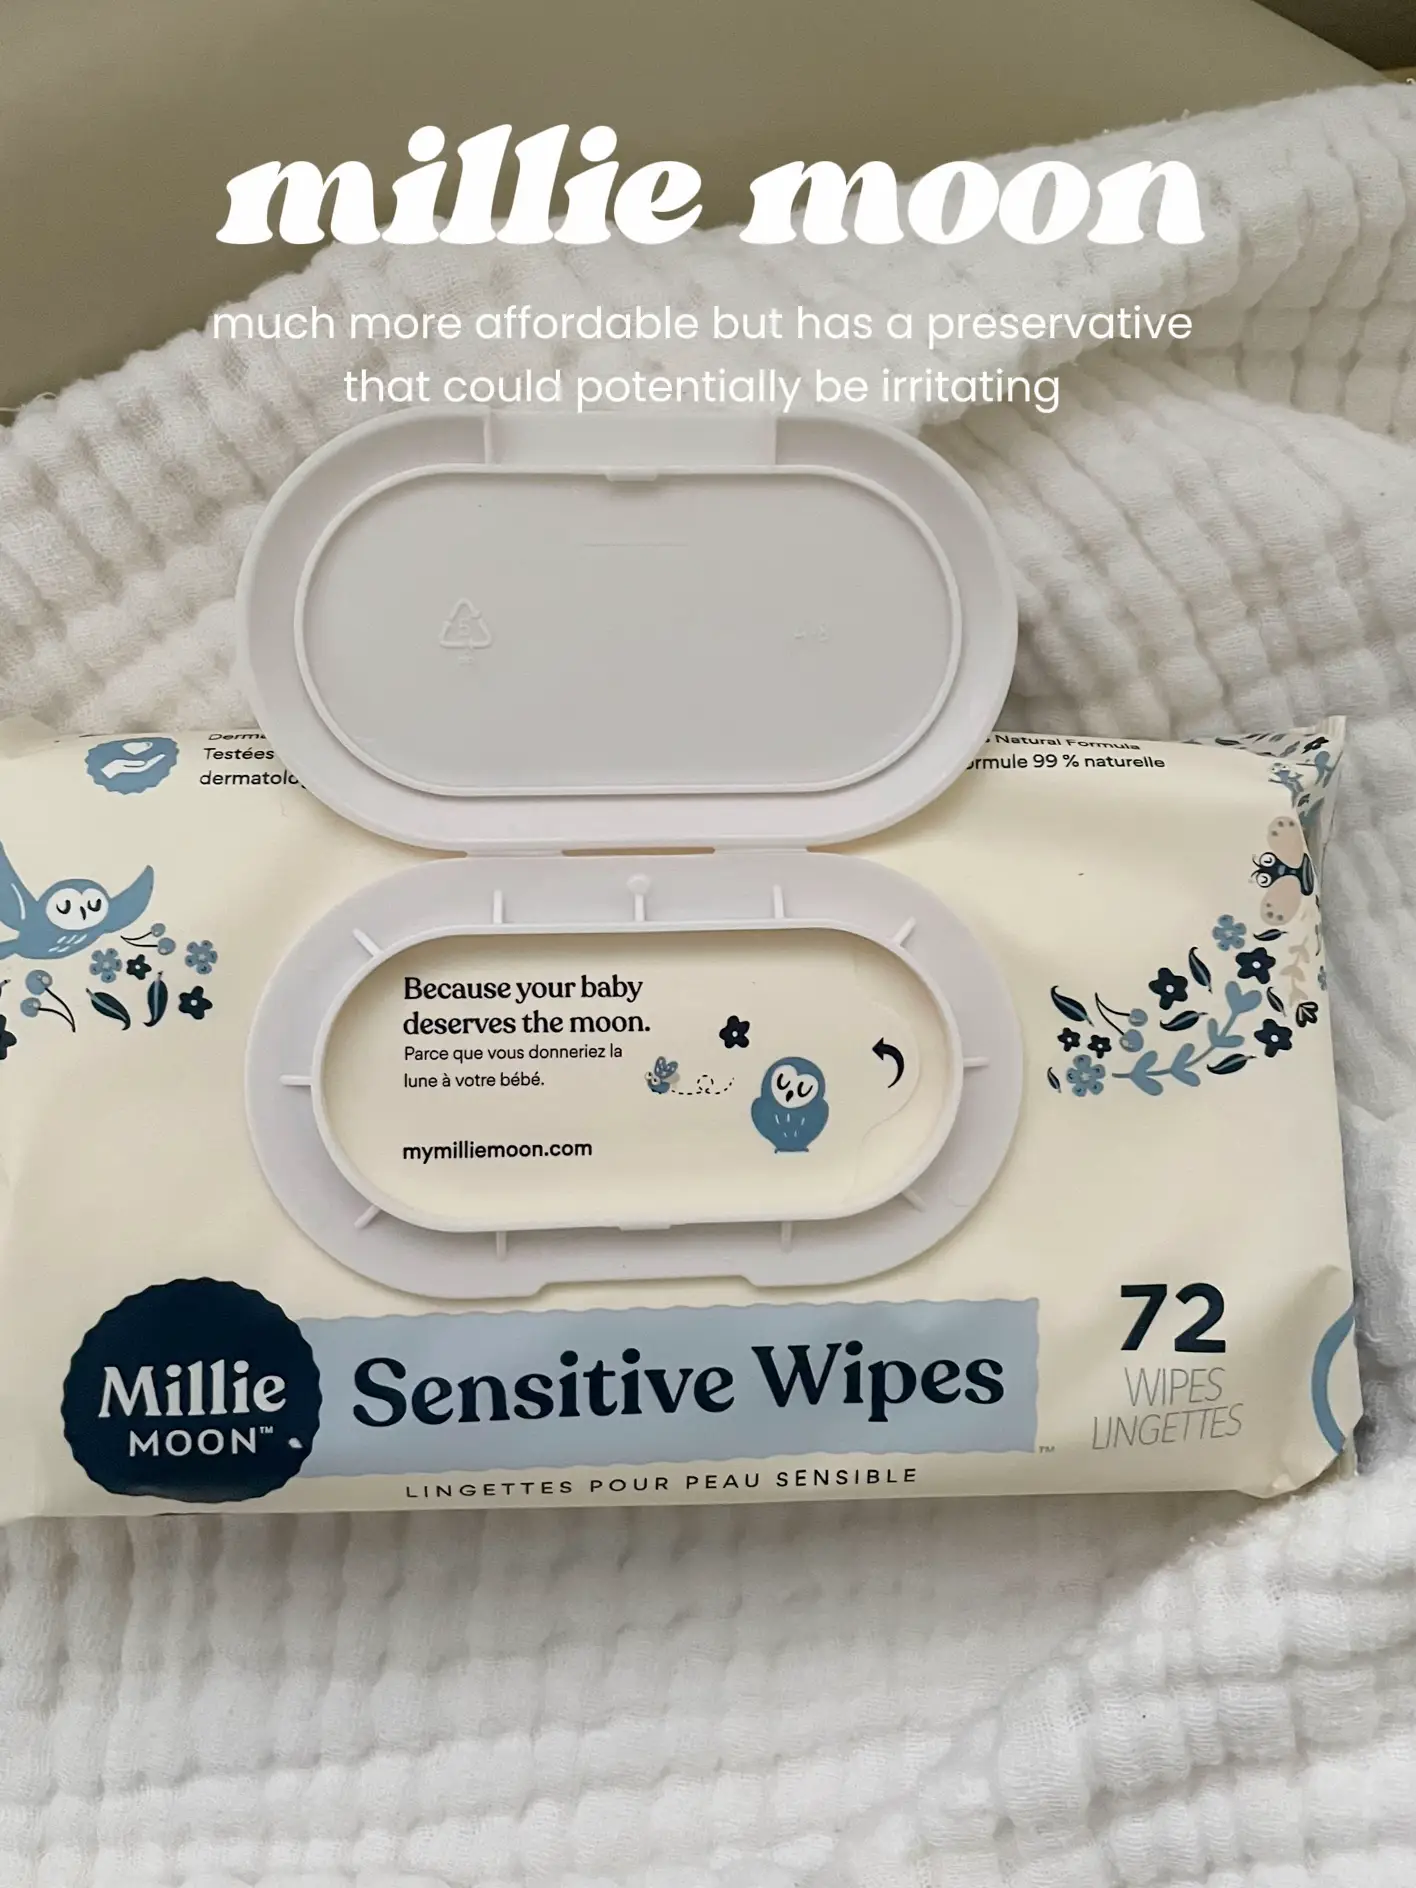 baby wipes for refreshing after workout - Lemon8 Search